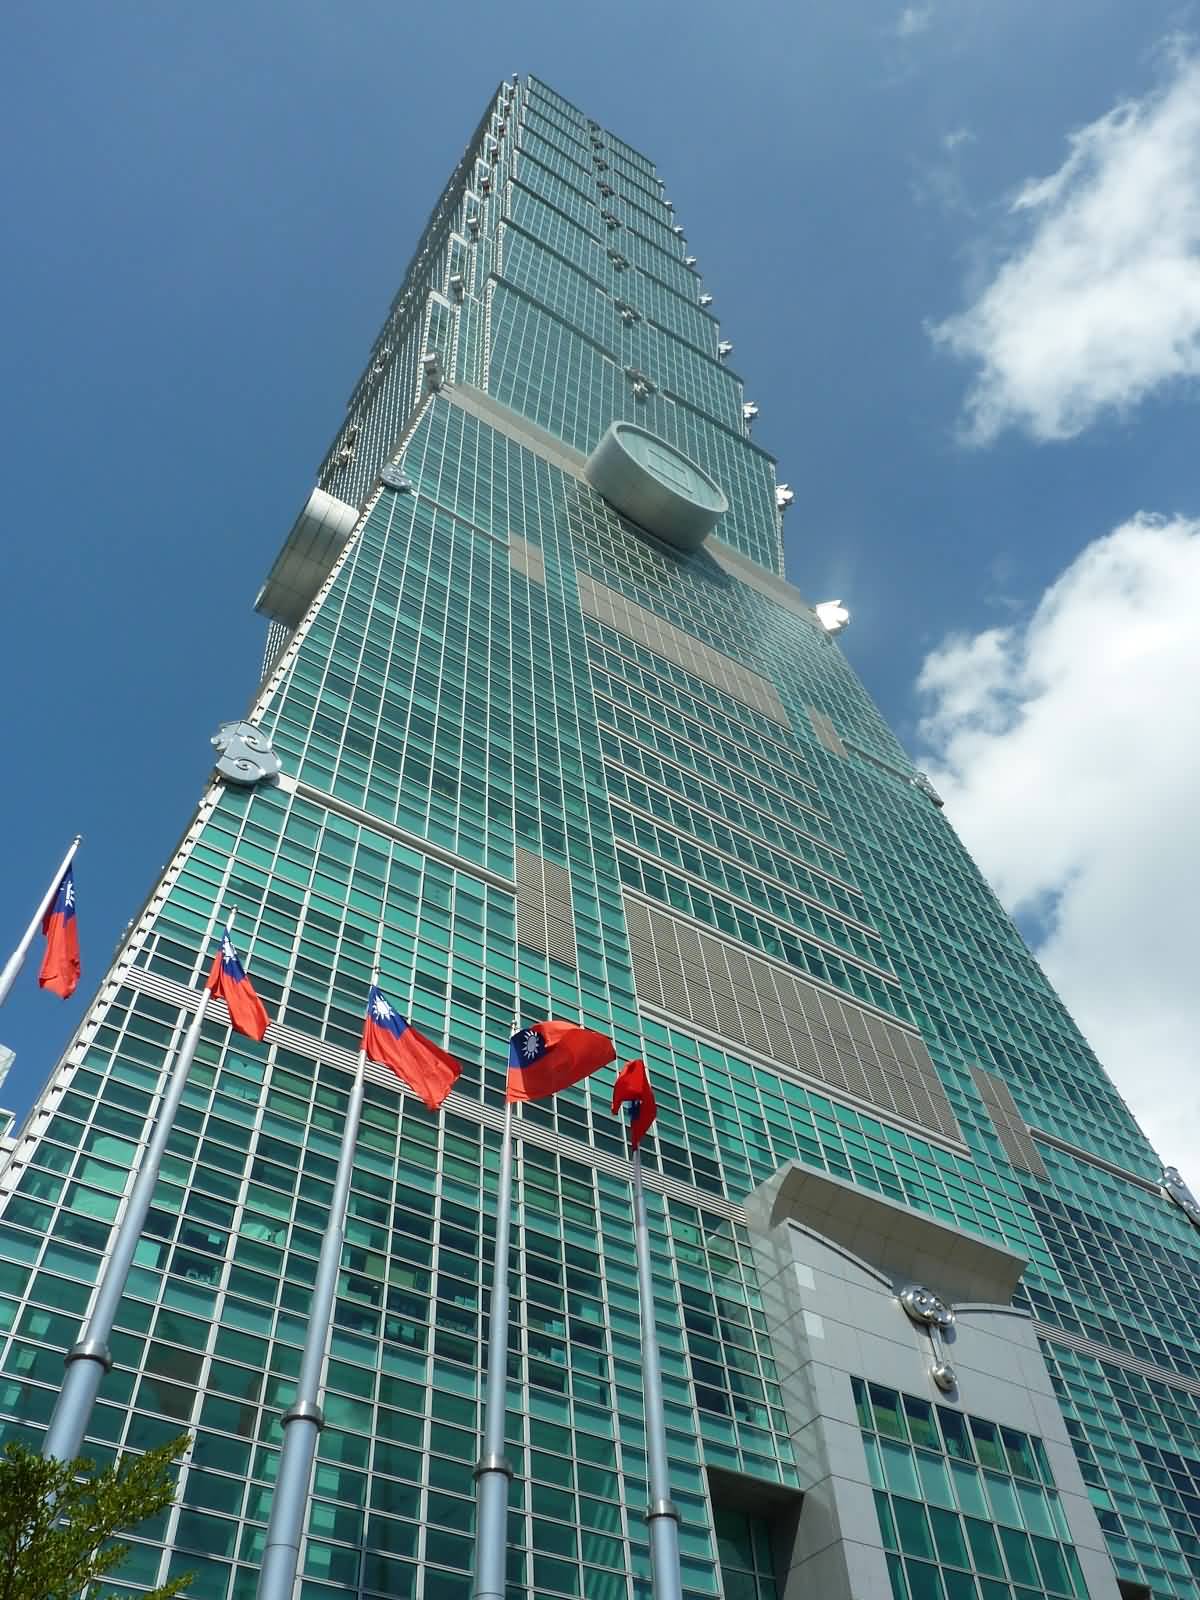 Taipei 101 Tower View From Below